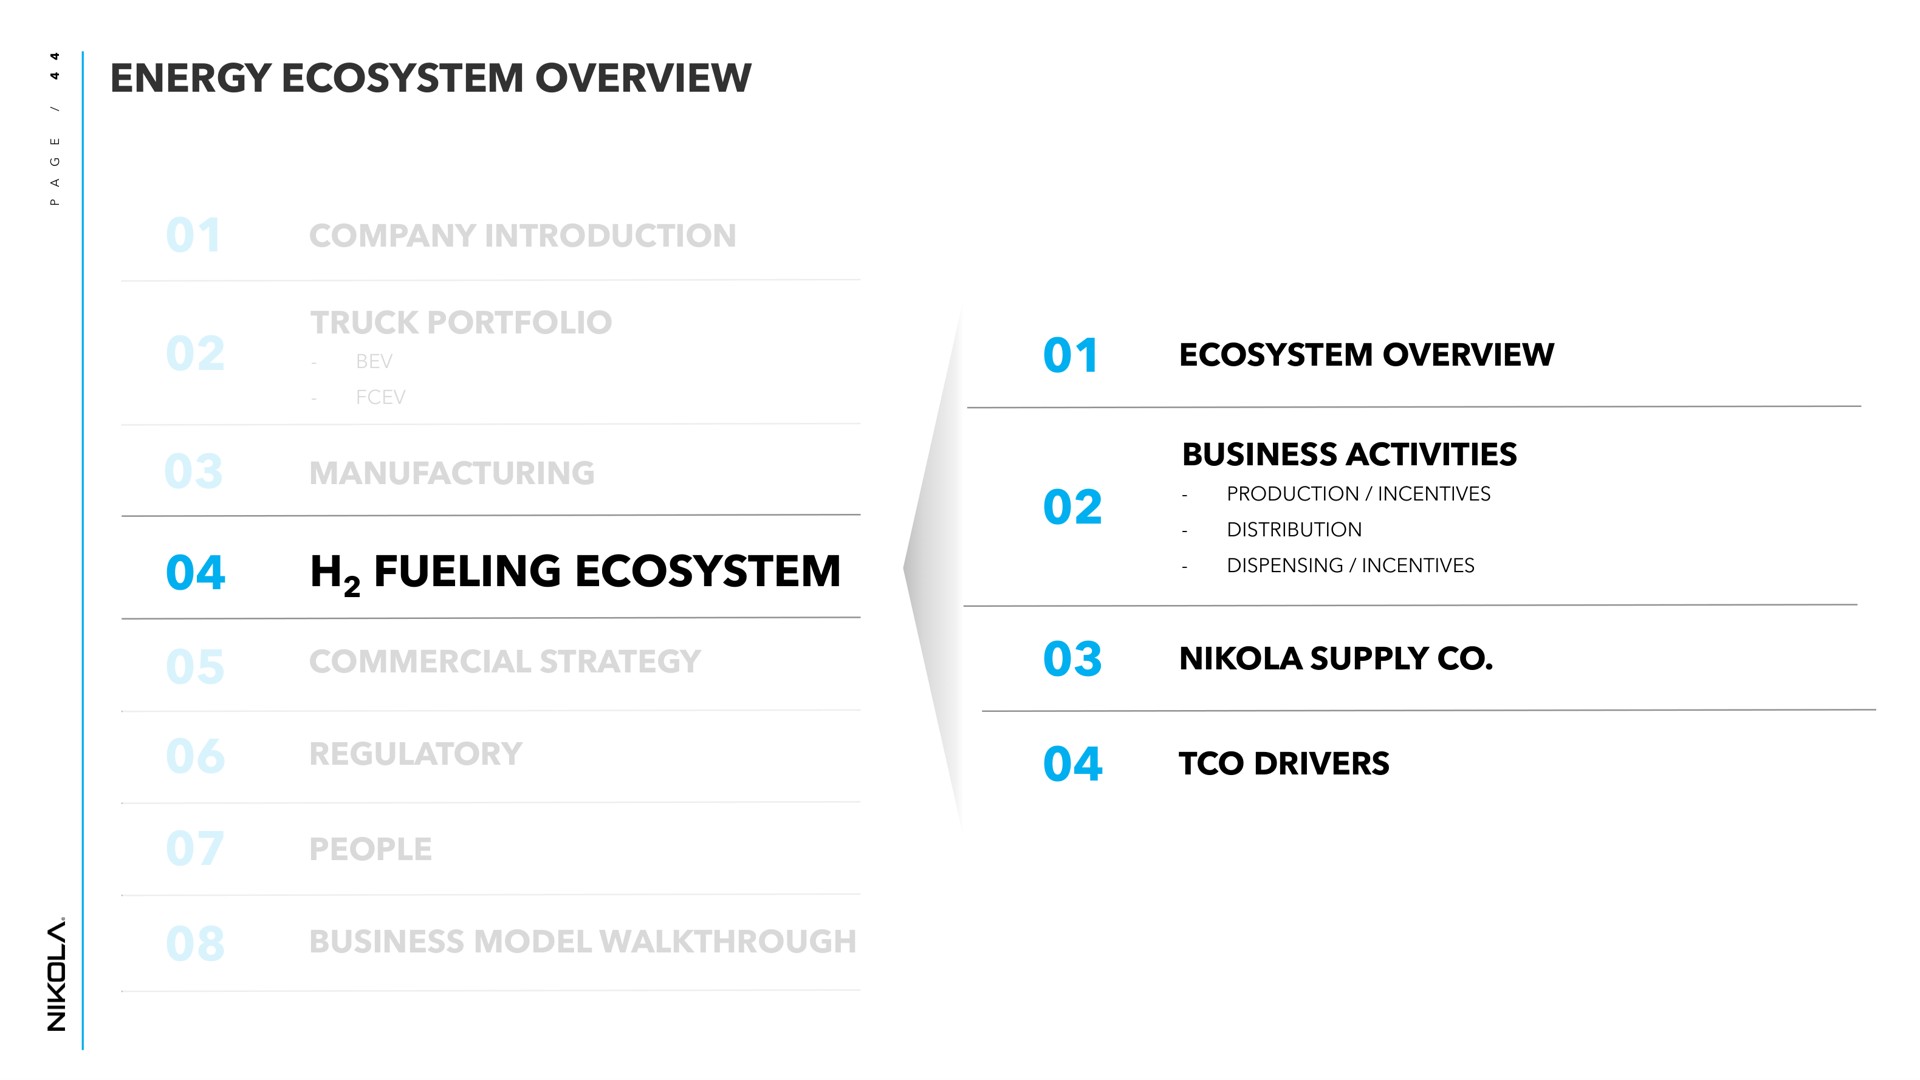 energy ecosystem overview company introduction truck portfolio manufacturing fueling ecosystem commercial strategy regulatory people business model ecosystem overview business activities supply drivers | Nikola